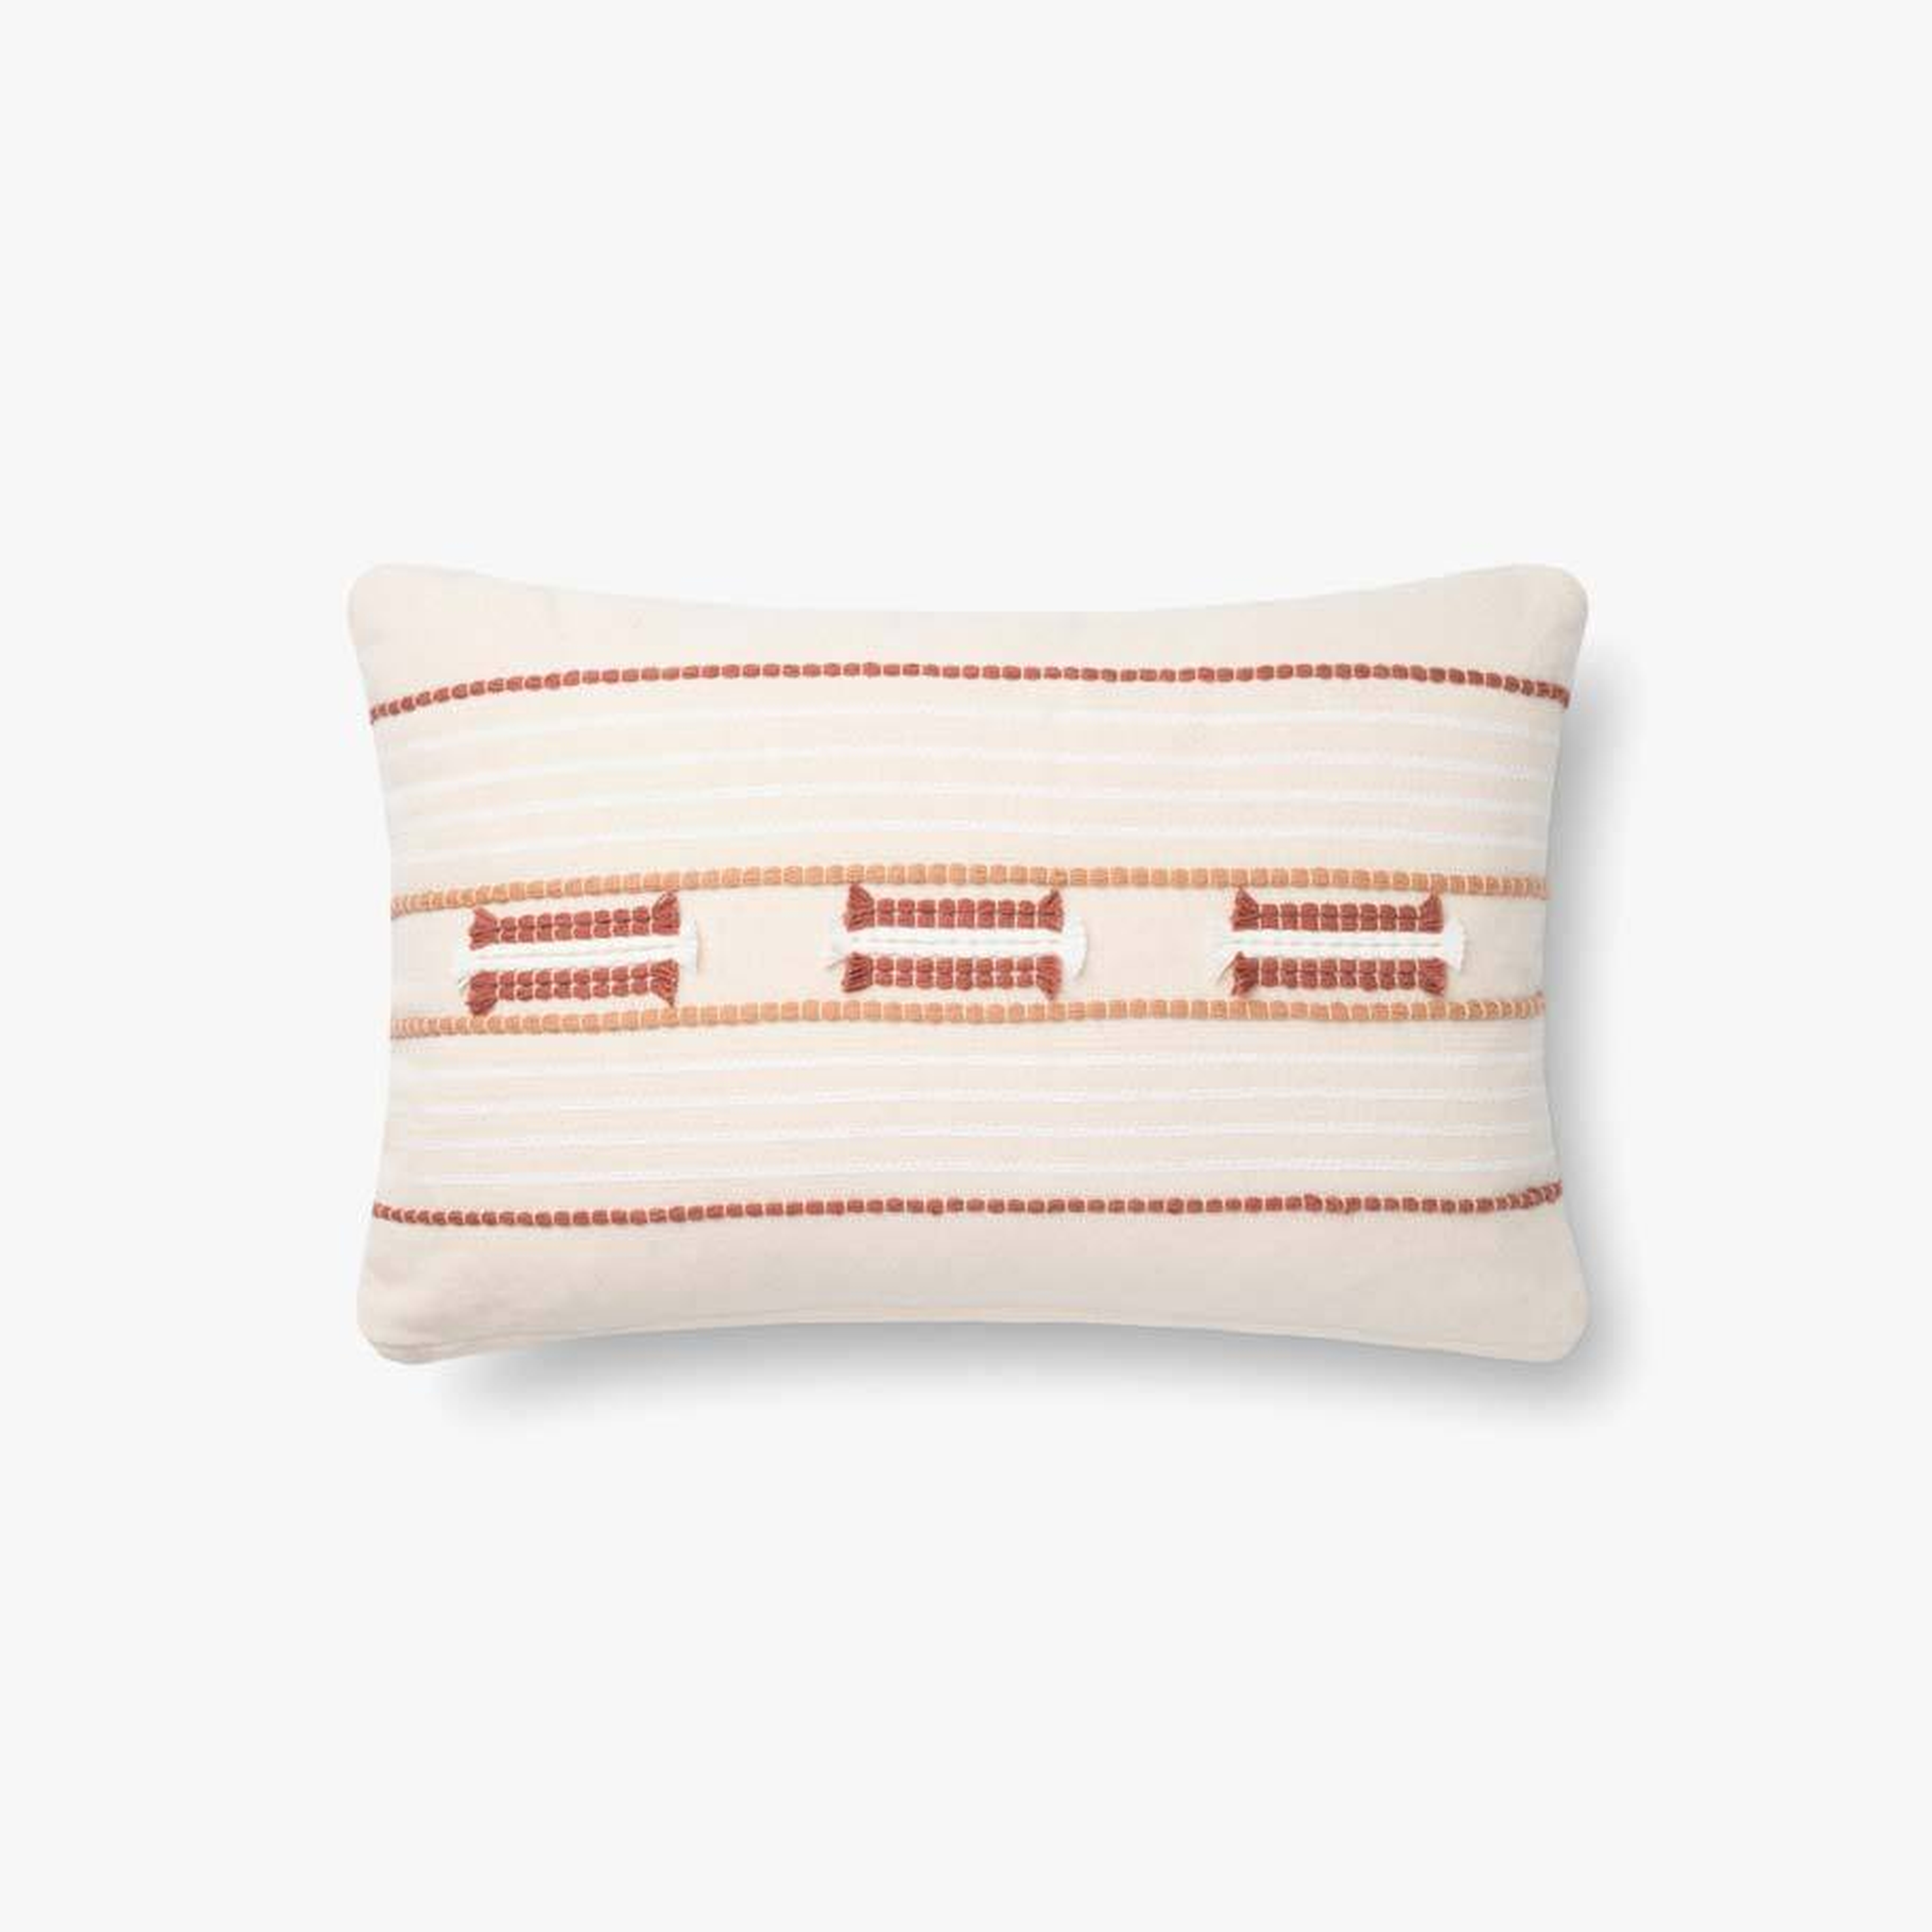 Magnolia Home by Joanna Gaines PILLOWS P1141 NATURAL / SPICE 13" x 21" Cover w/Poly - Magnolia Home by Joana Gaines Crafted by Loloi Rugs